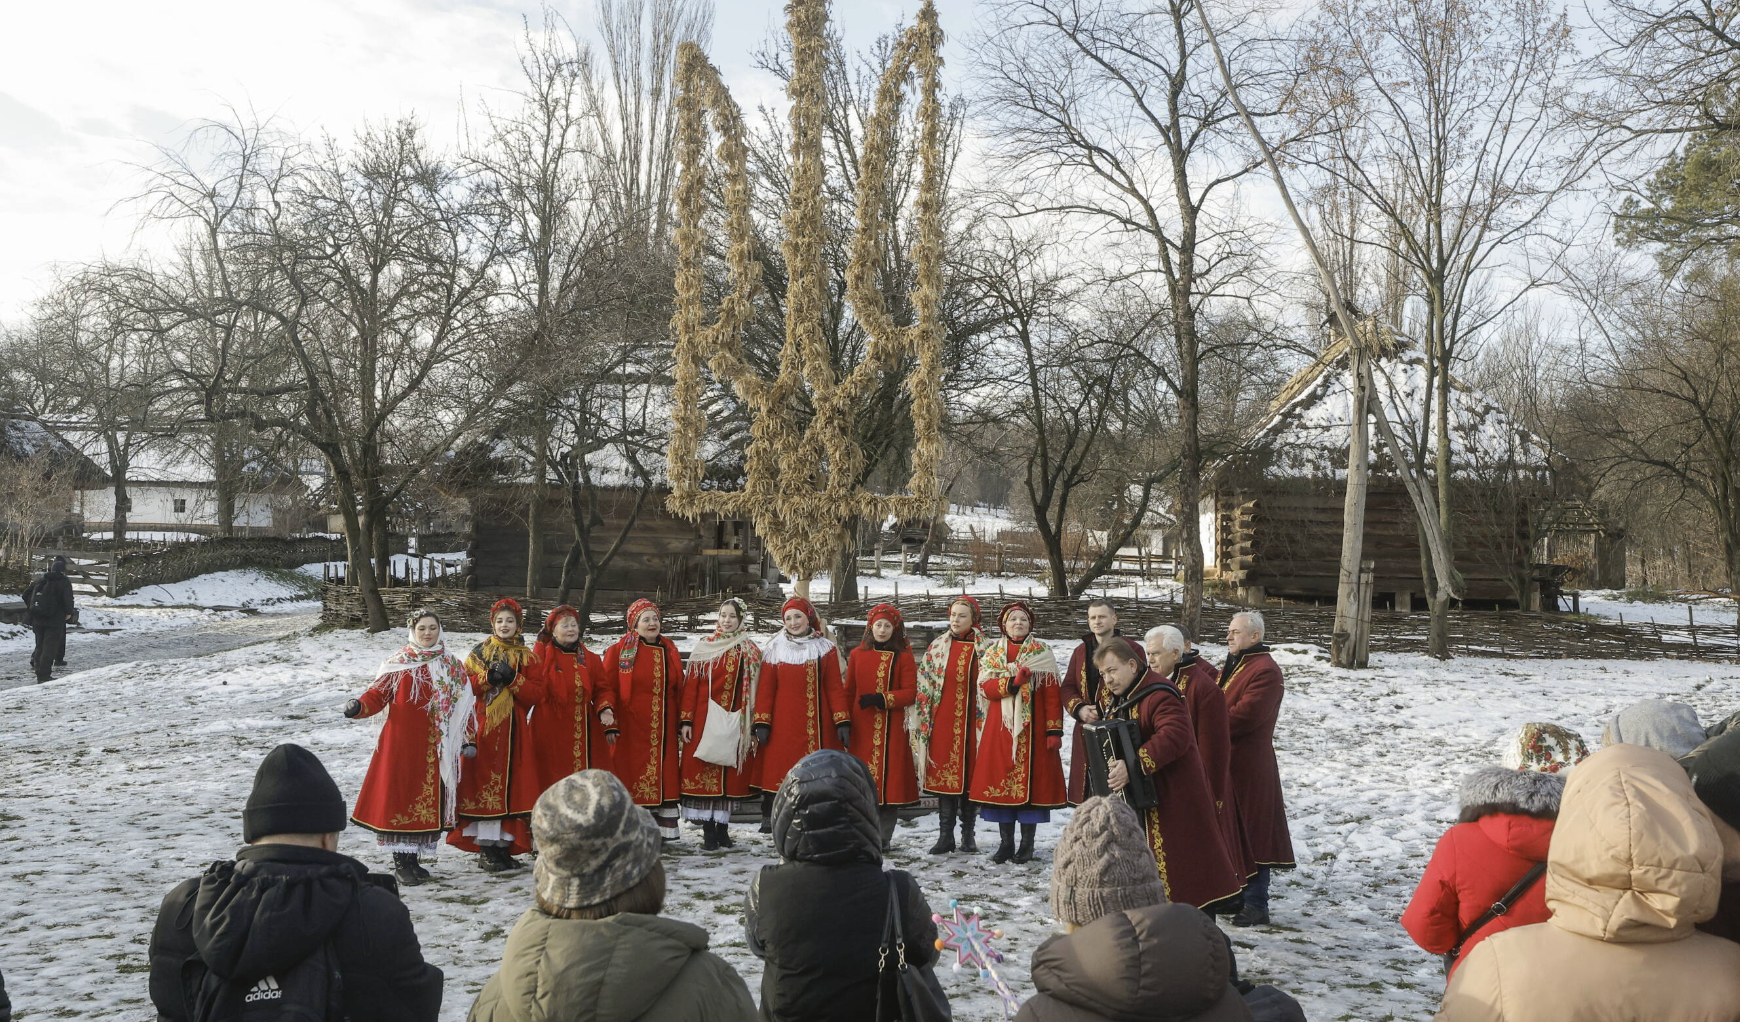 A choir in traditional dress in the village of Pirogovo, near kyiv.